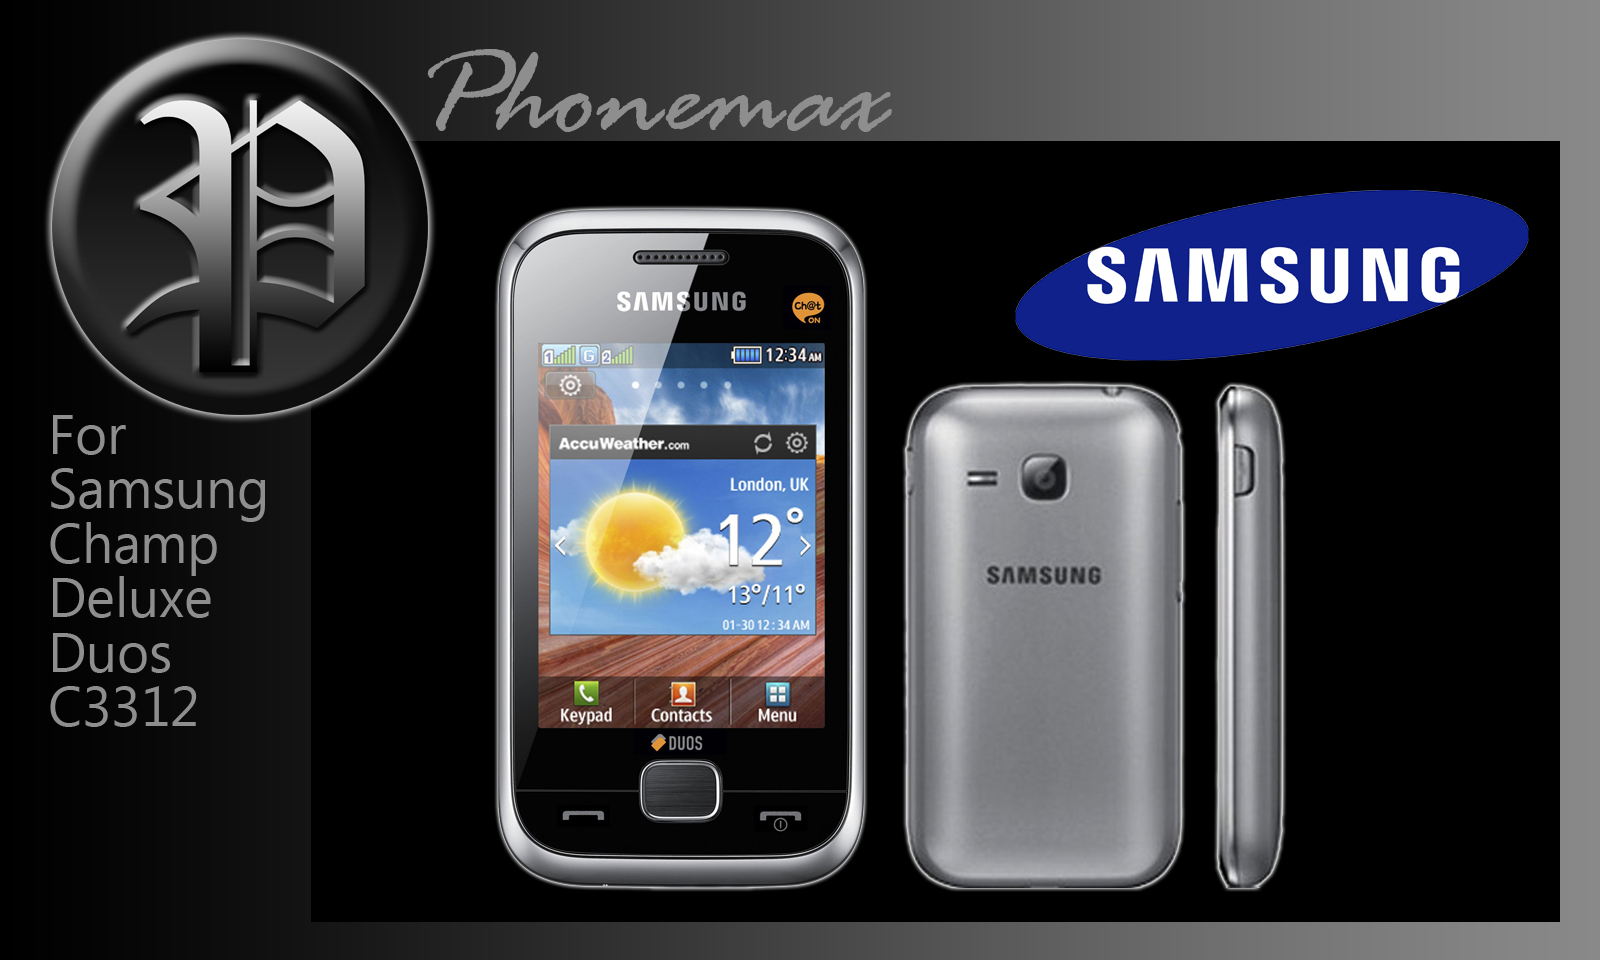 Free Download Themes For Samsung Champ Deluxe Duos C3312